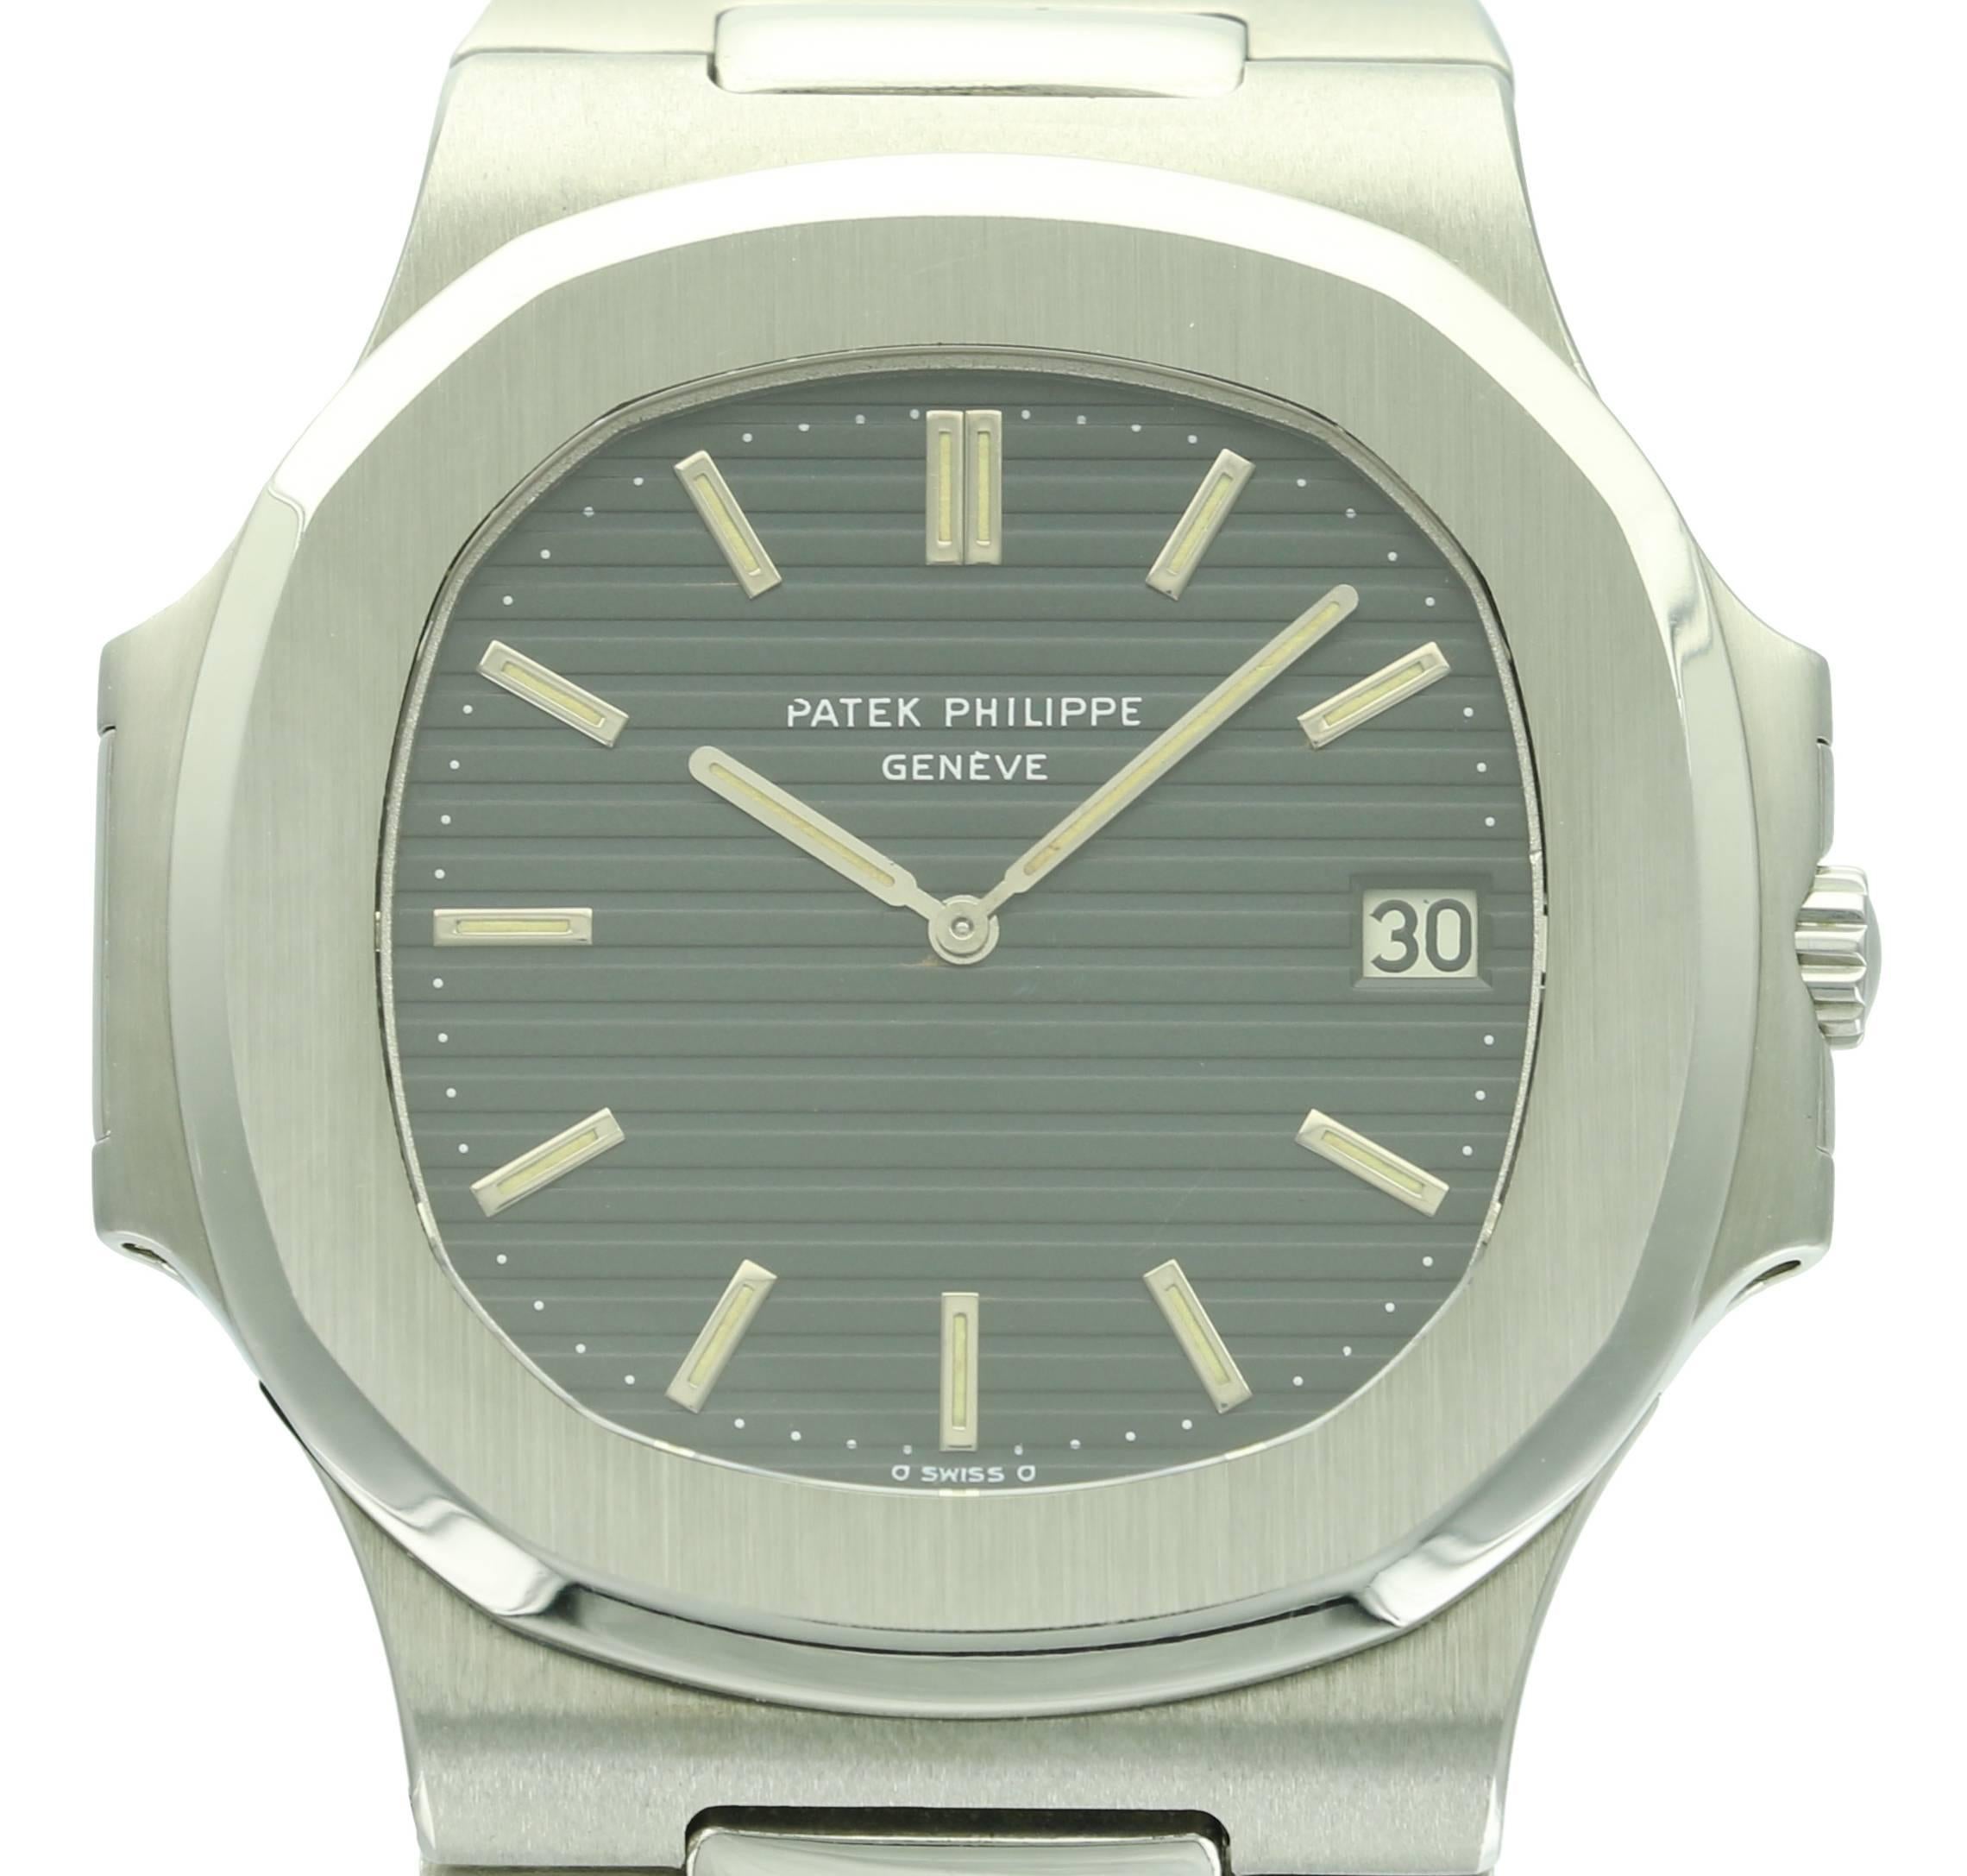 The Patek Philippe Nautilus the one of the brands most successful and iconic models ever produced. This reference, a 3700, was the very first reference of this model and was designed in the early 1970s by Gerald Genta, who later designed the Royal